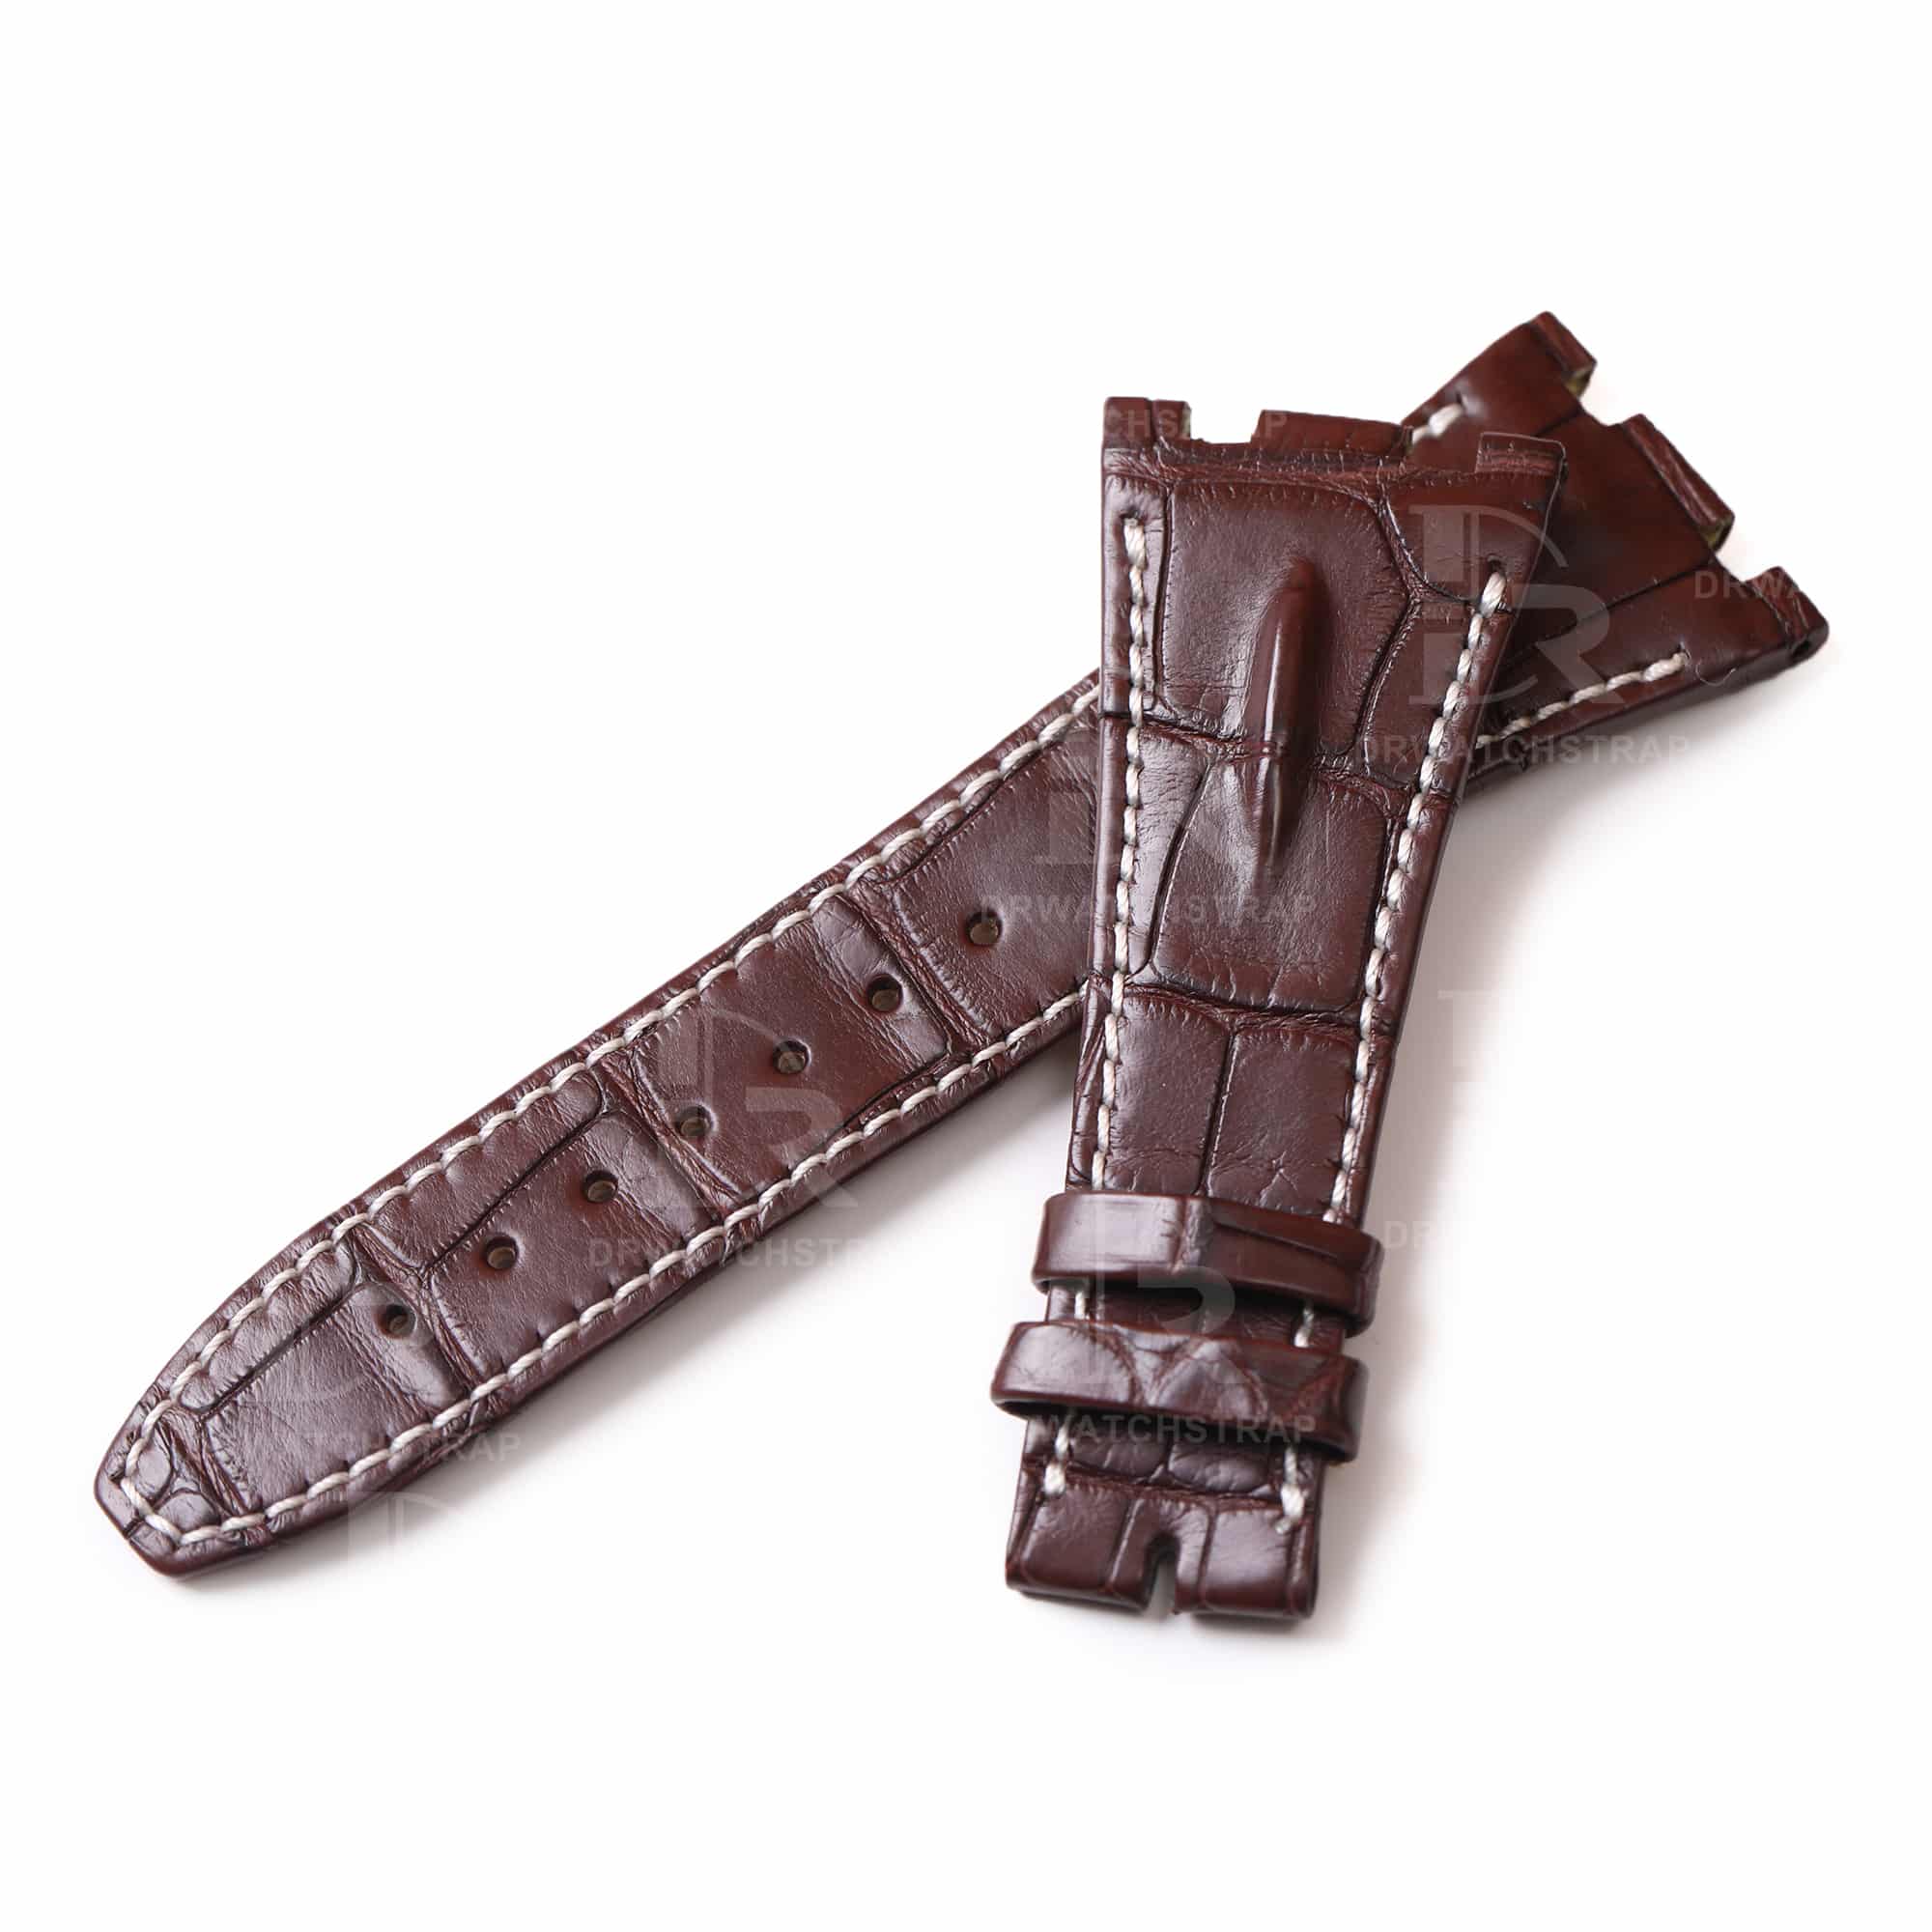 Genuine alligator belly-scale leather material